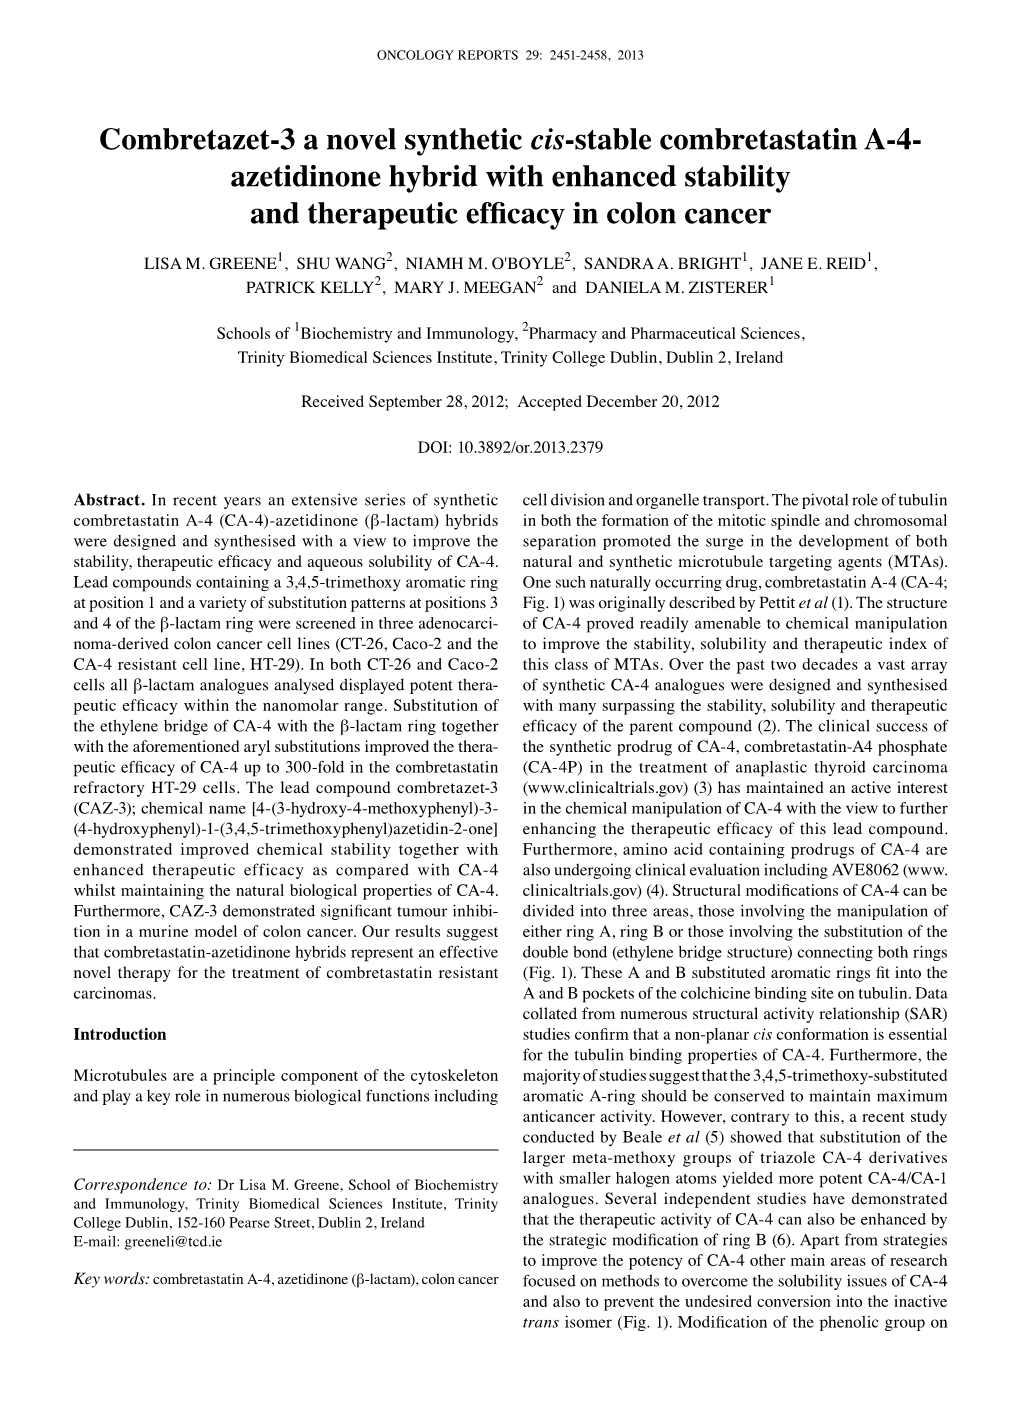 Combretazet-3 a Novel Synthetic Cis-Stable Combretastatin A-4- Azetidinone Hybrid with Enhanced Stability and Therapeutic Efficacy in Colon Cancer